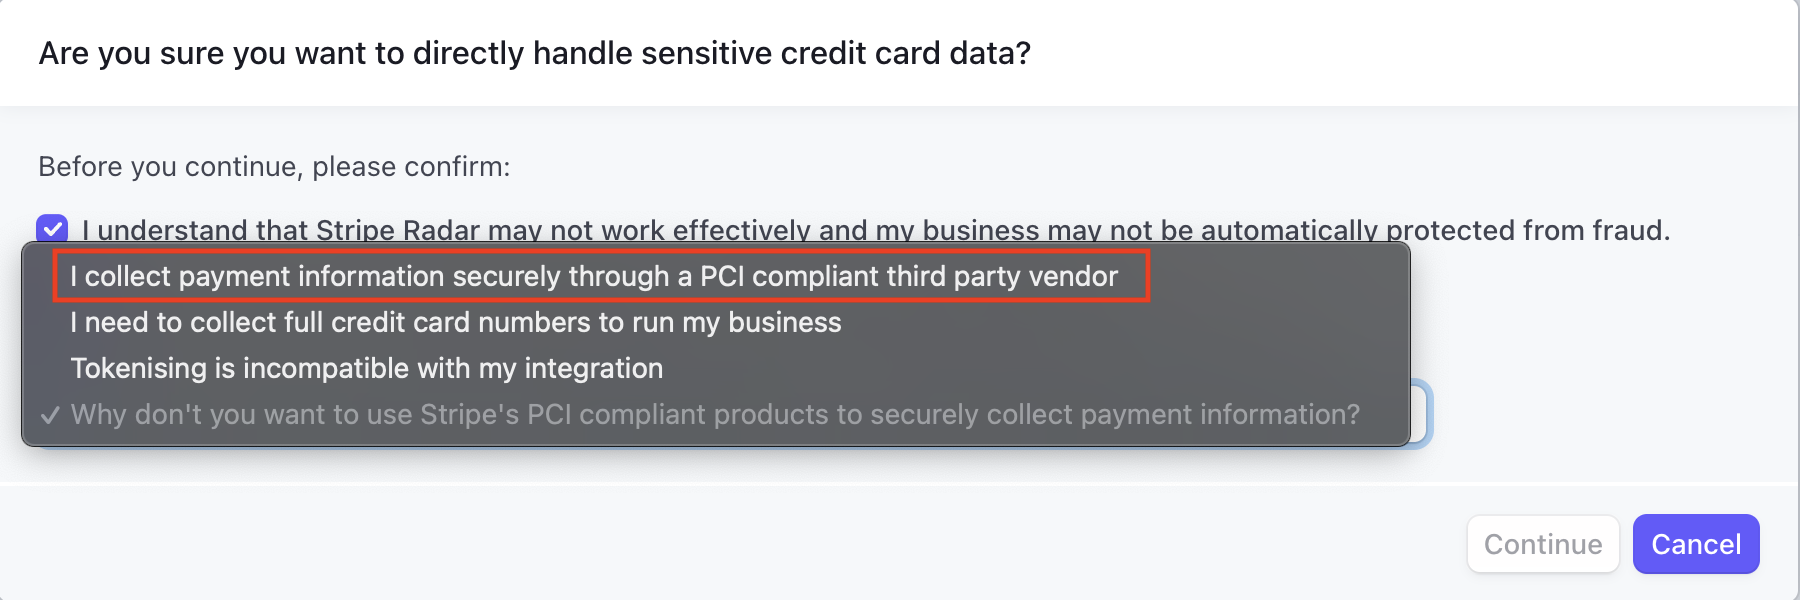 I_collect_payment_information_securely_through_a_PCI_compliant_third_party_vendor.png